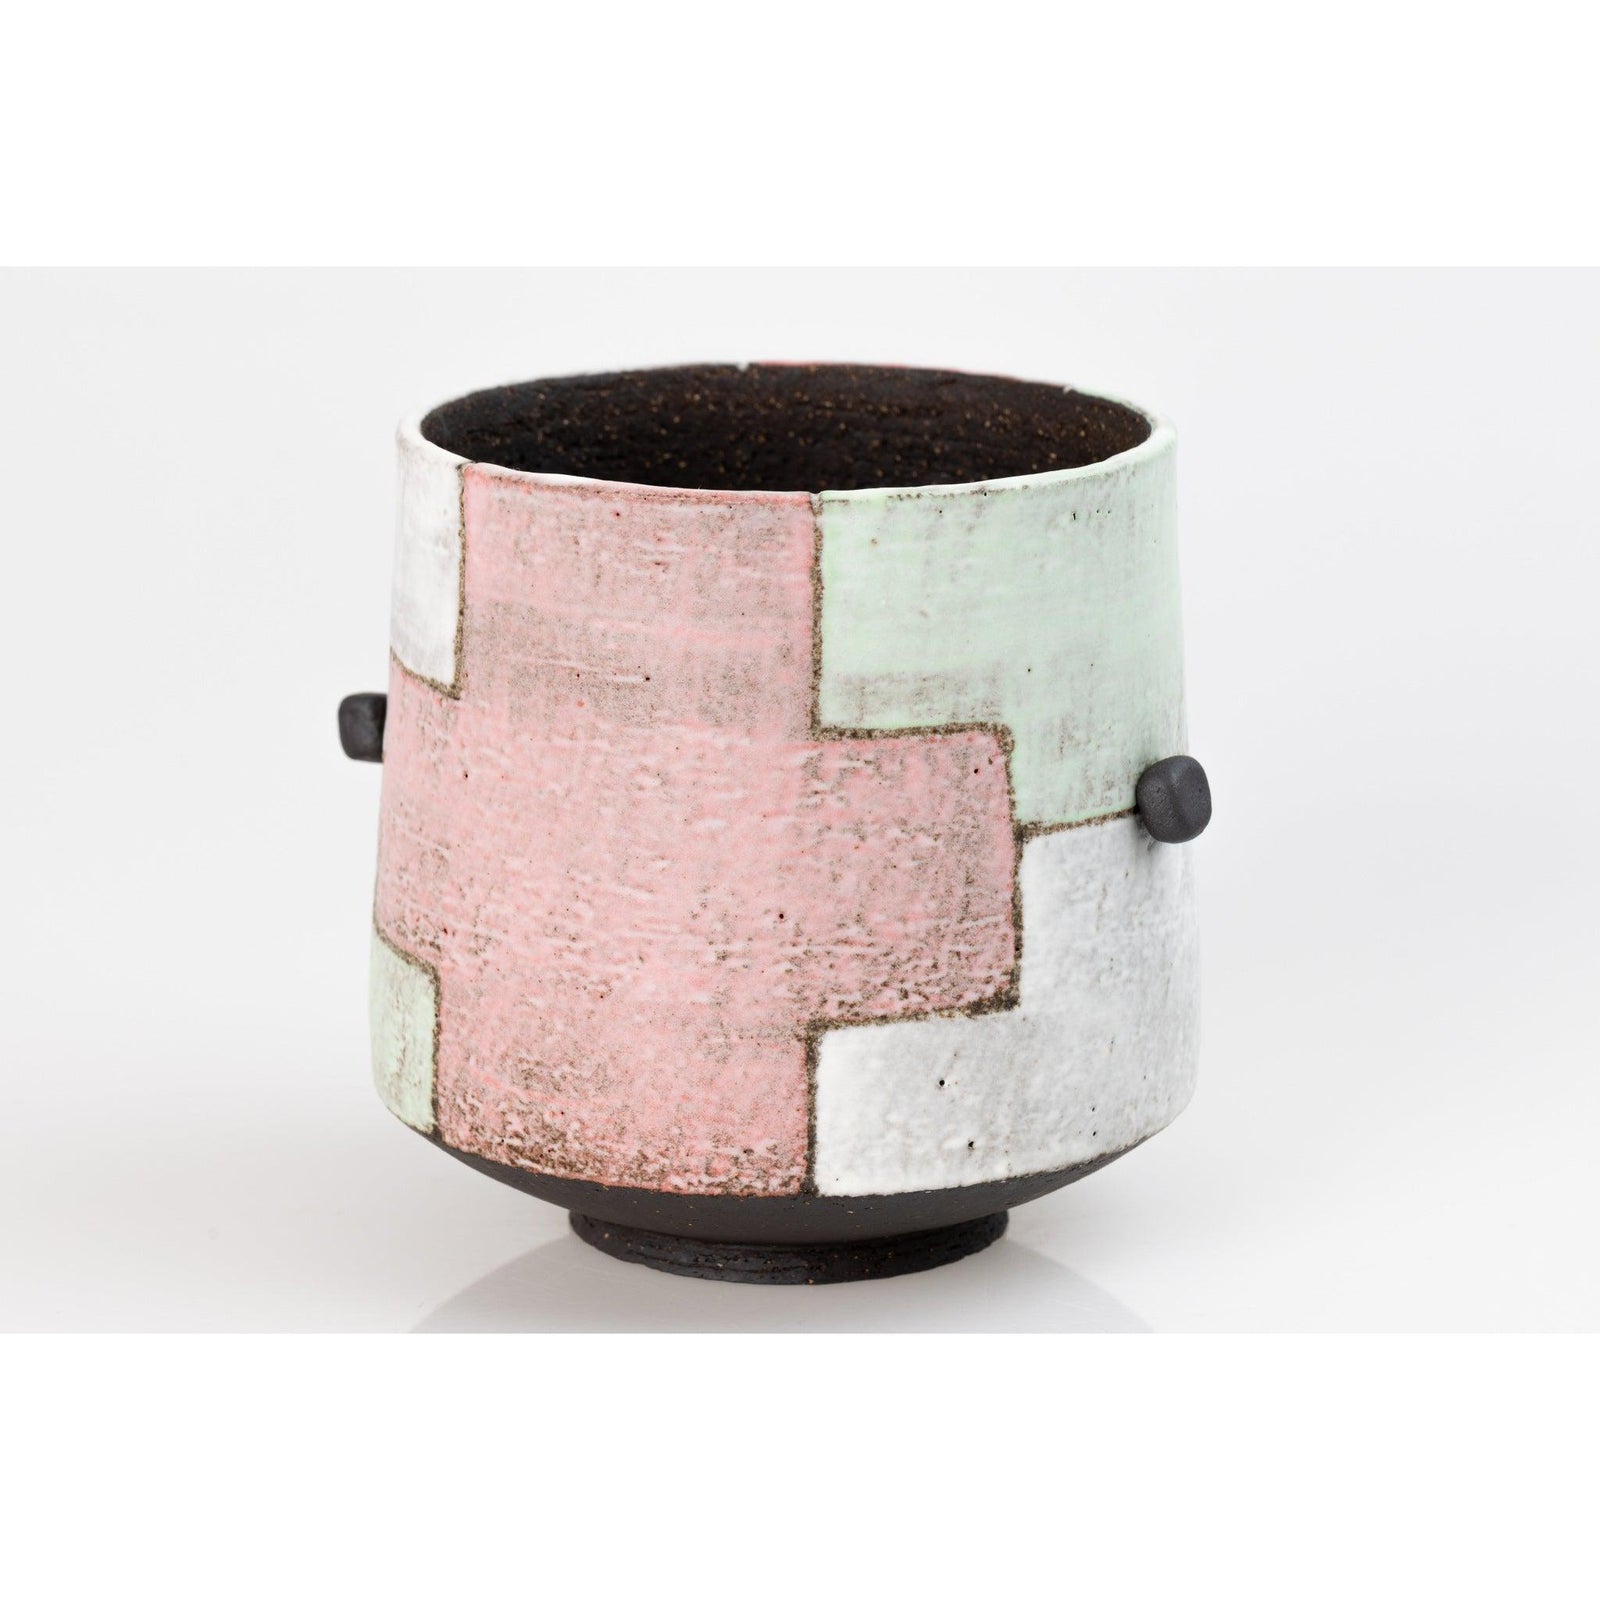 'AP40b Black Vessel with "washed" colours' by Ania Perkowska, available at Padstow Gallery, Cornwall